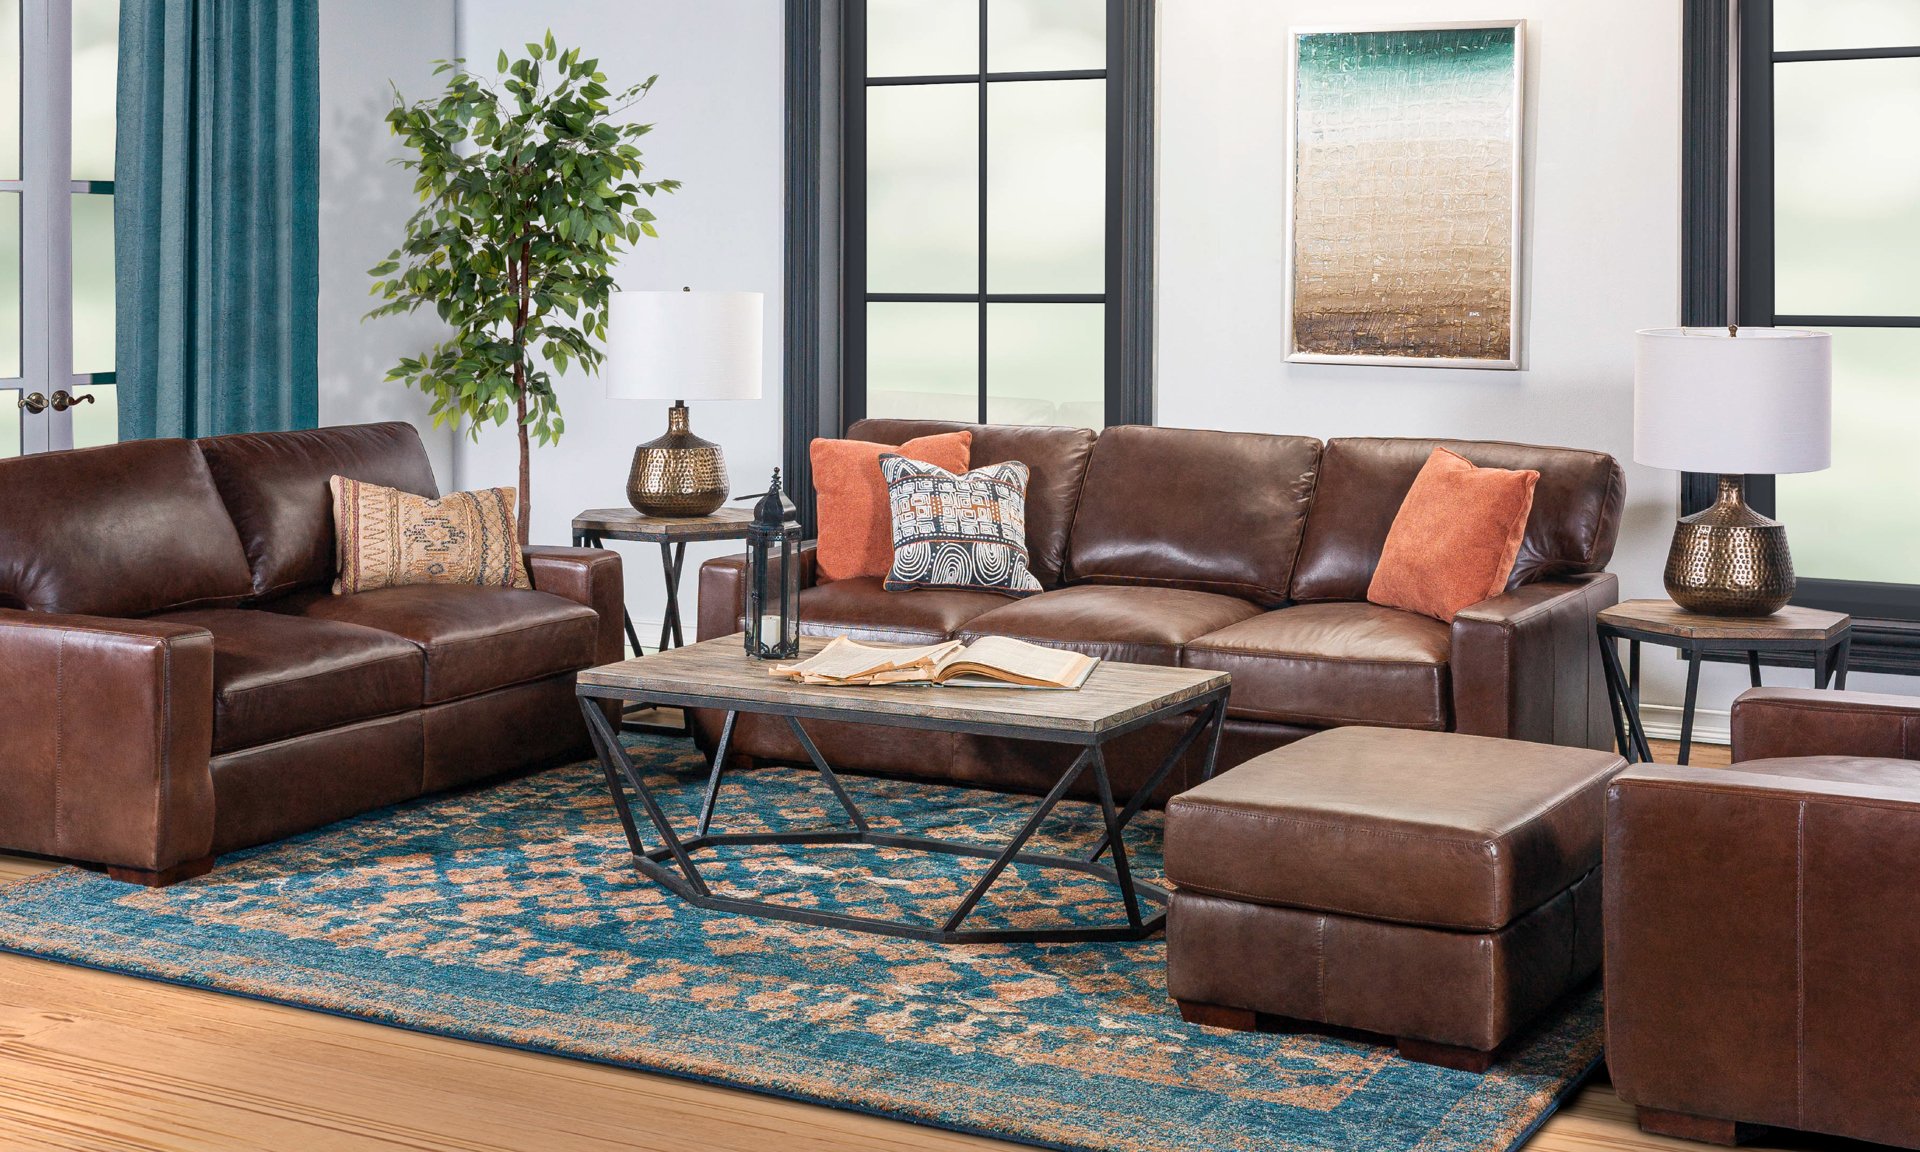 Living room set featuring a brown leather sofa and loveseat.